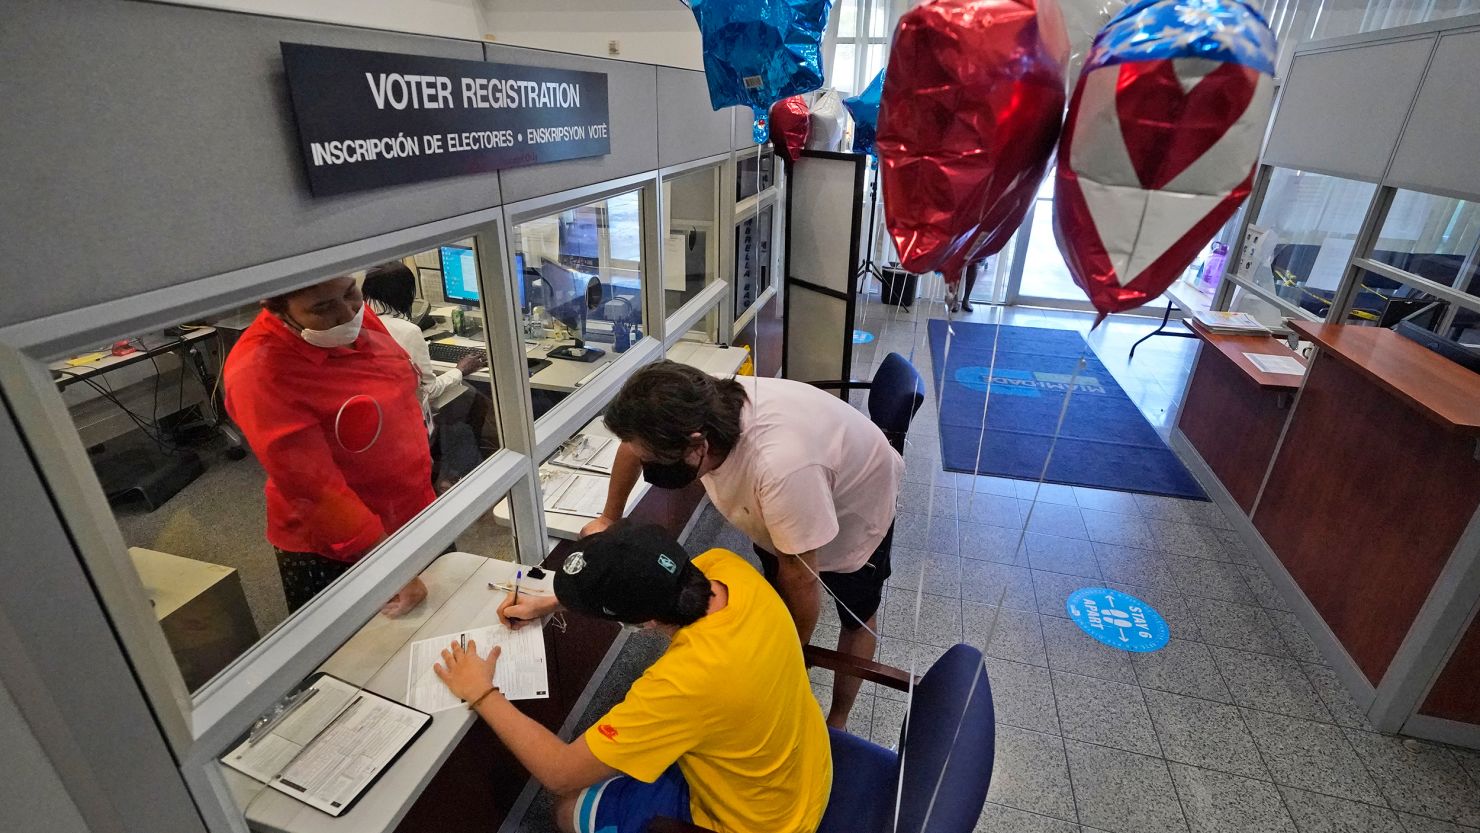 Lucas Saez, foreground, 22, fills out his voter registration form as his father Ramiro Saez, center rear, looks on, Tuesday, Oct. 6, 2020, at the Miami-Dade County Elections Department in Doral, Fla. 